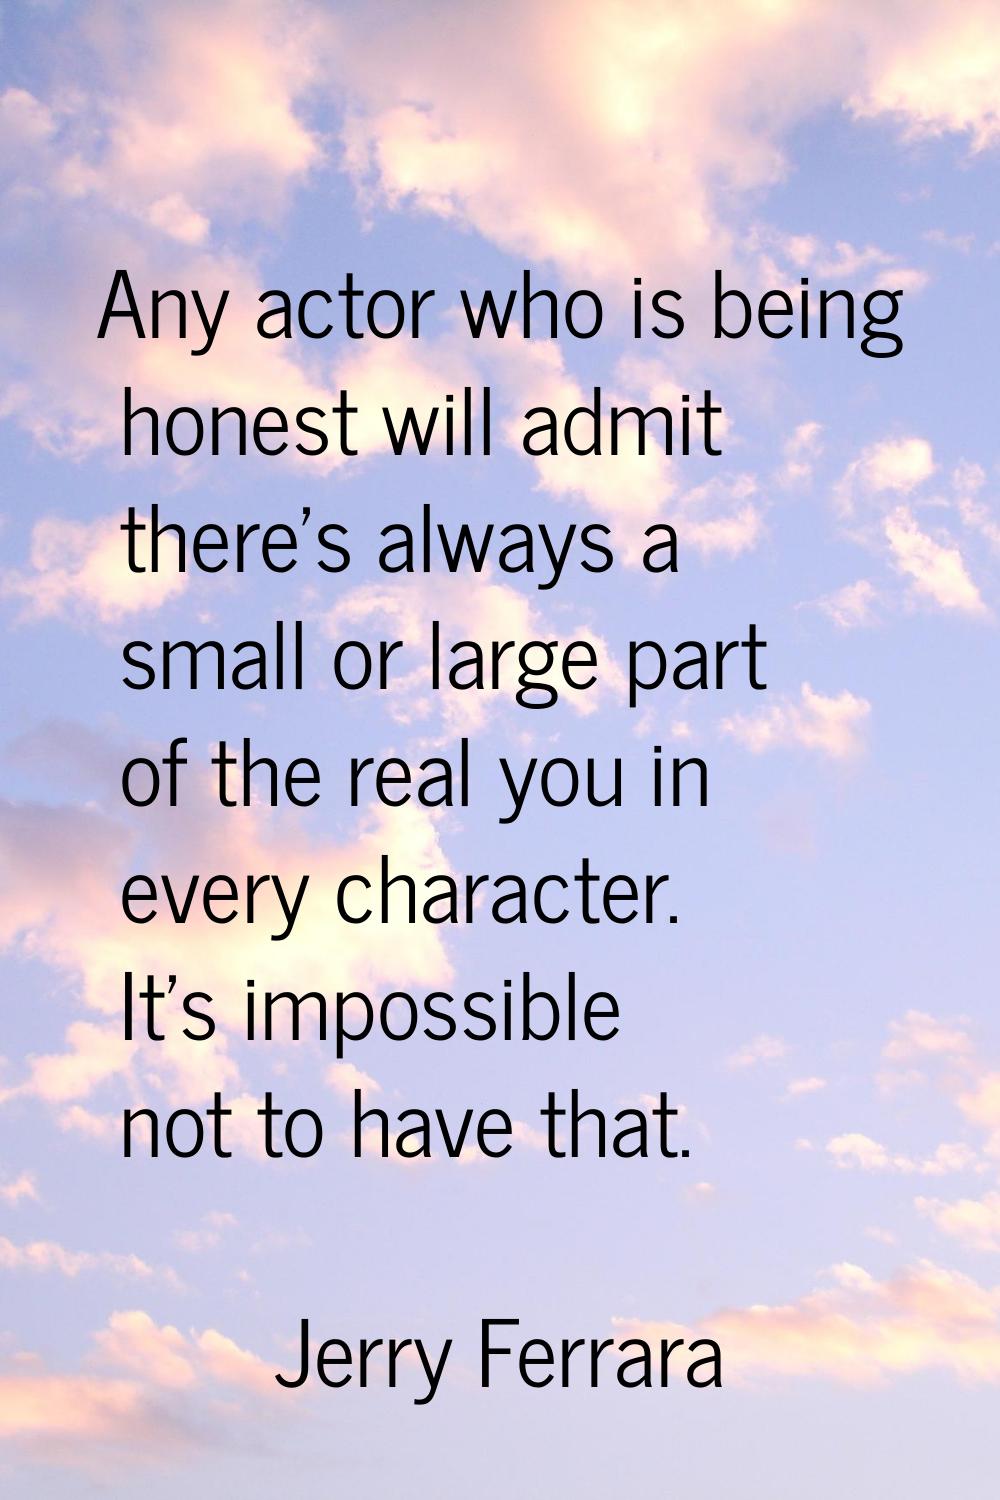 Any actor who is being honest will admit there's always a small or large part of the real you in ev